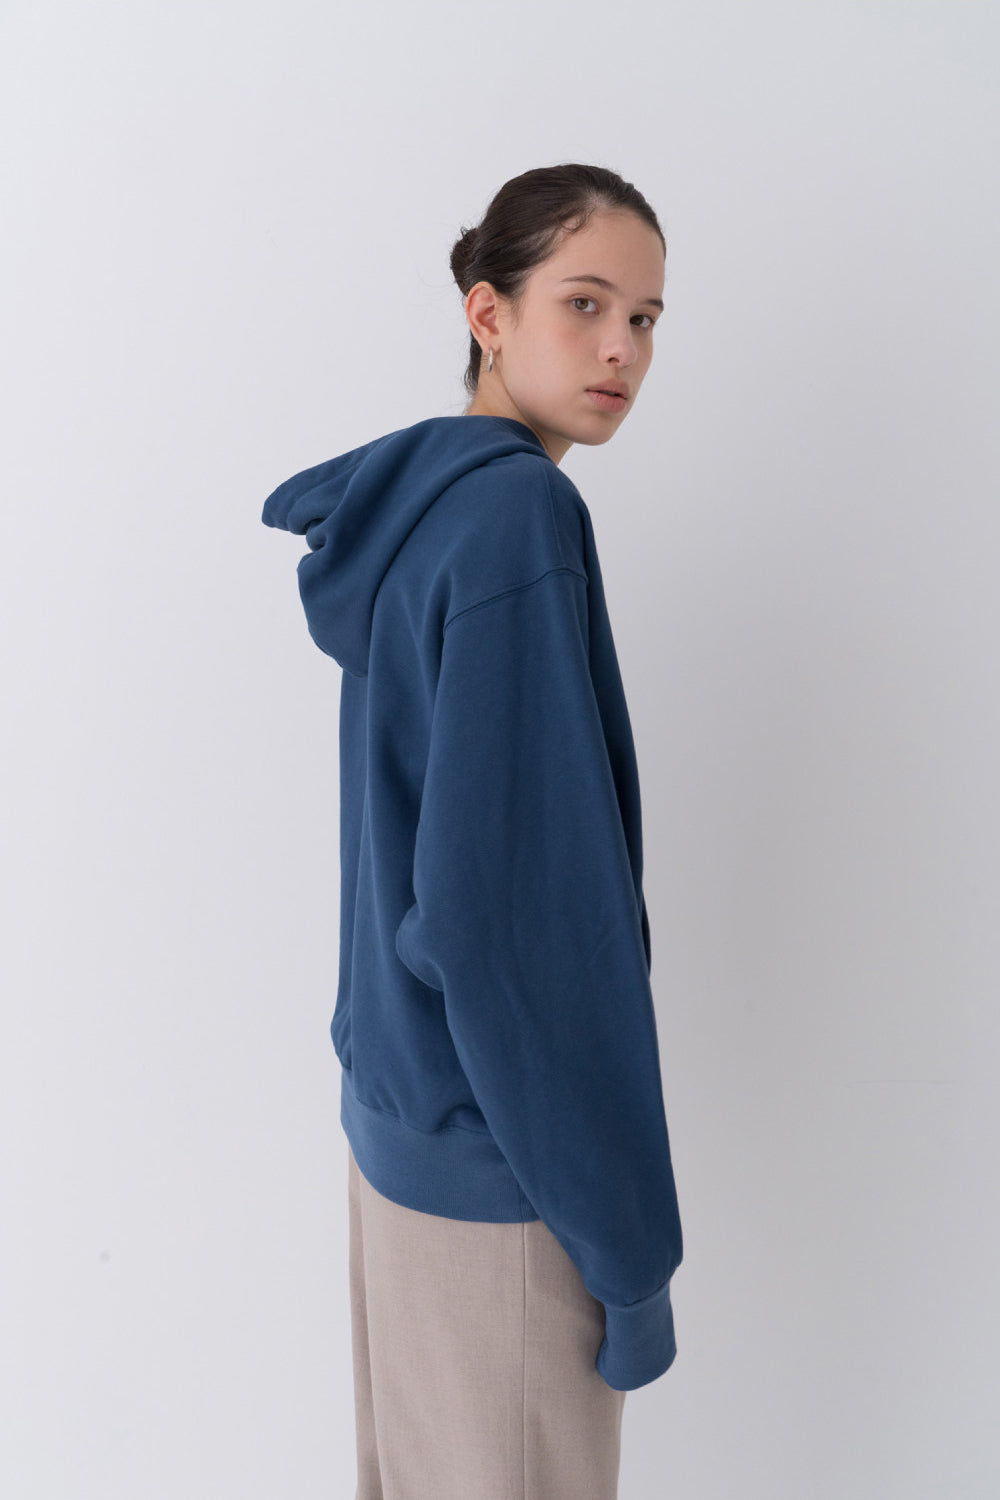 NOTA Signal String Hood Blue Modest Long-Sleeve Women's Sweater with Front Pockets, Hoodie, Loose Fit 100% Cotton